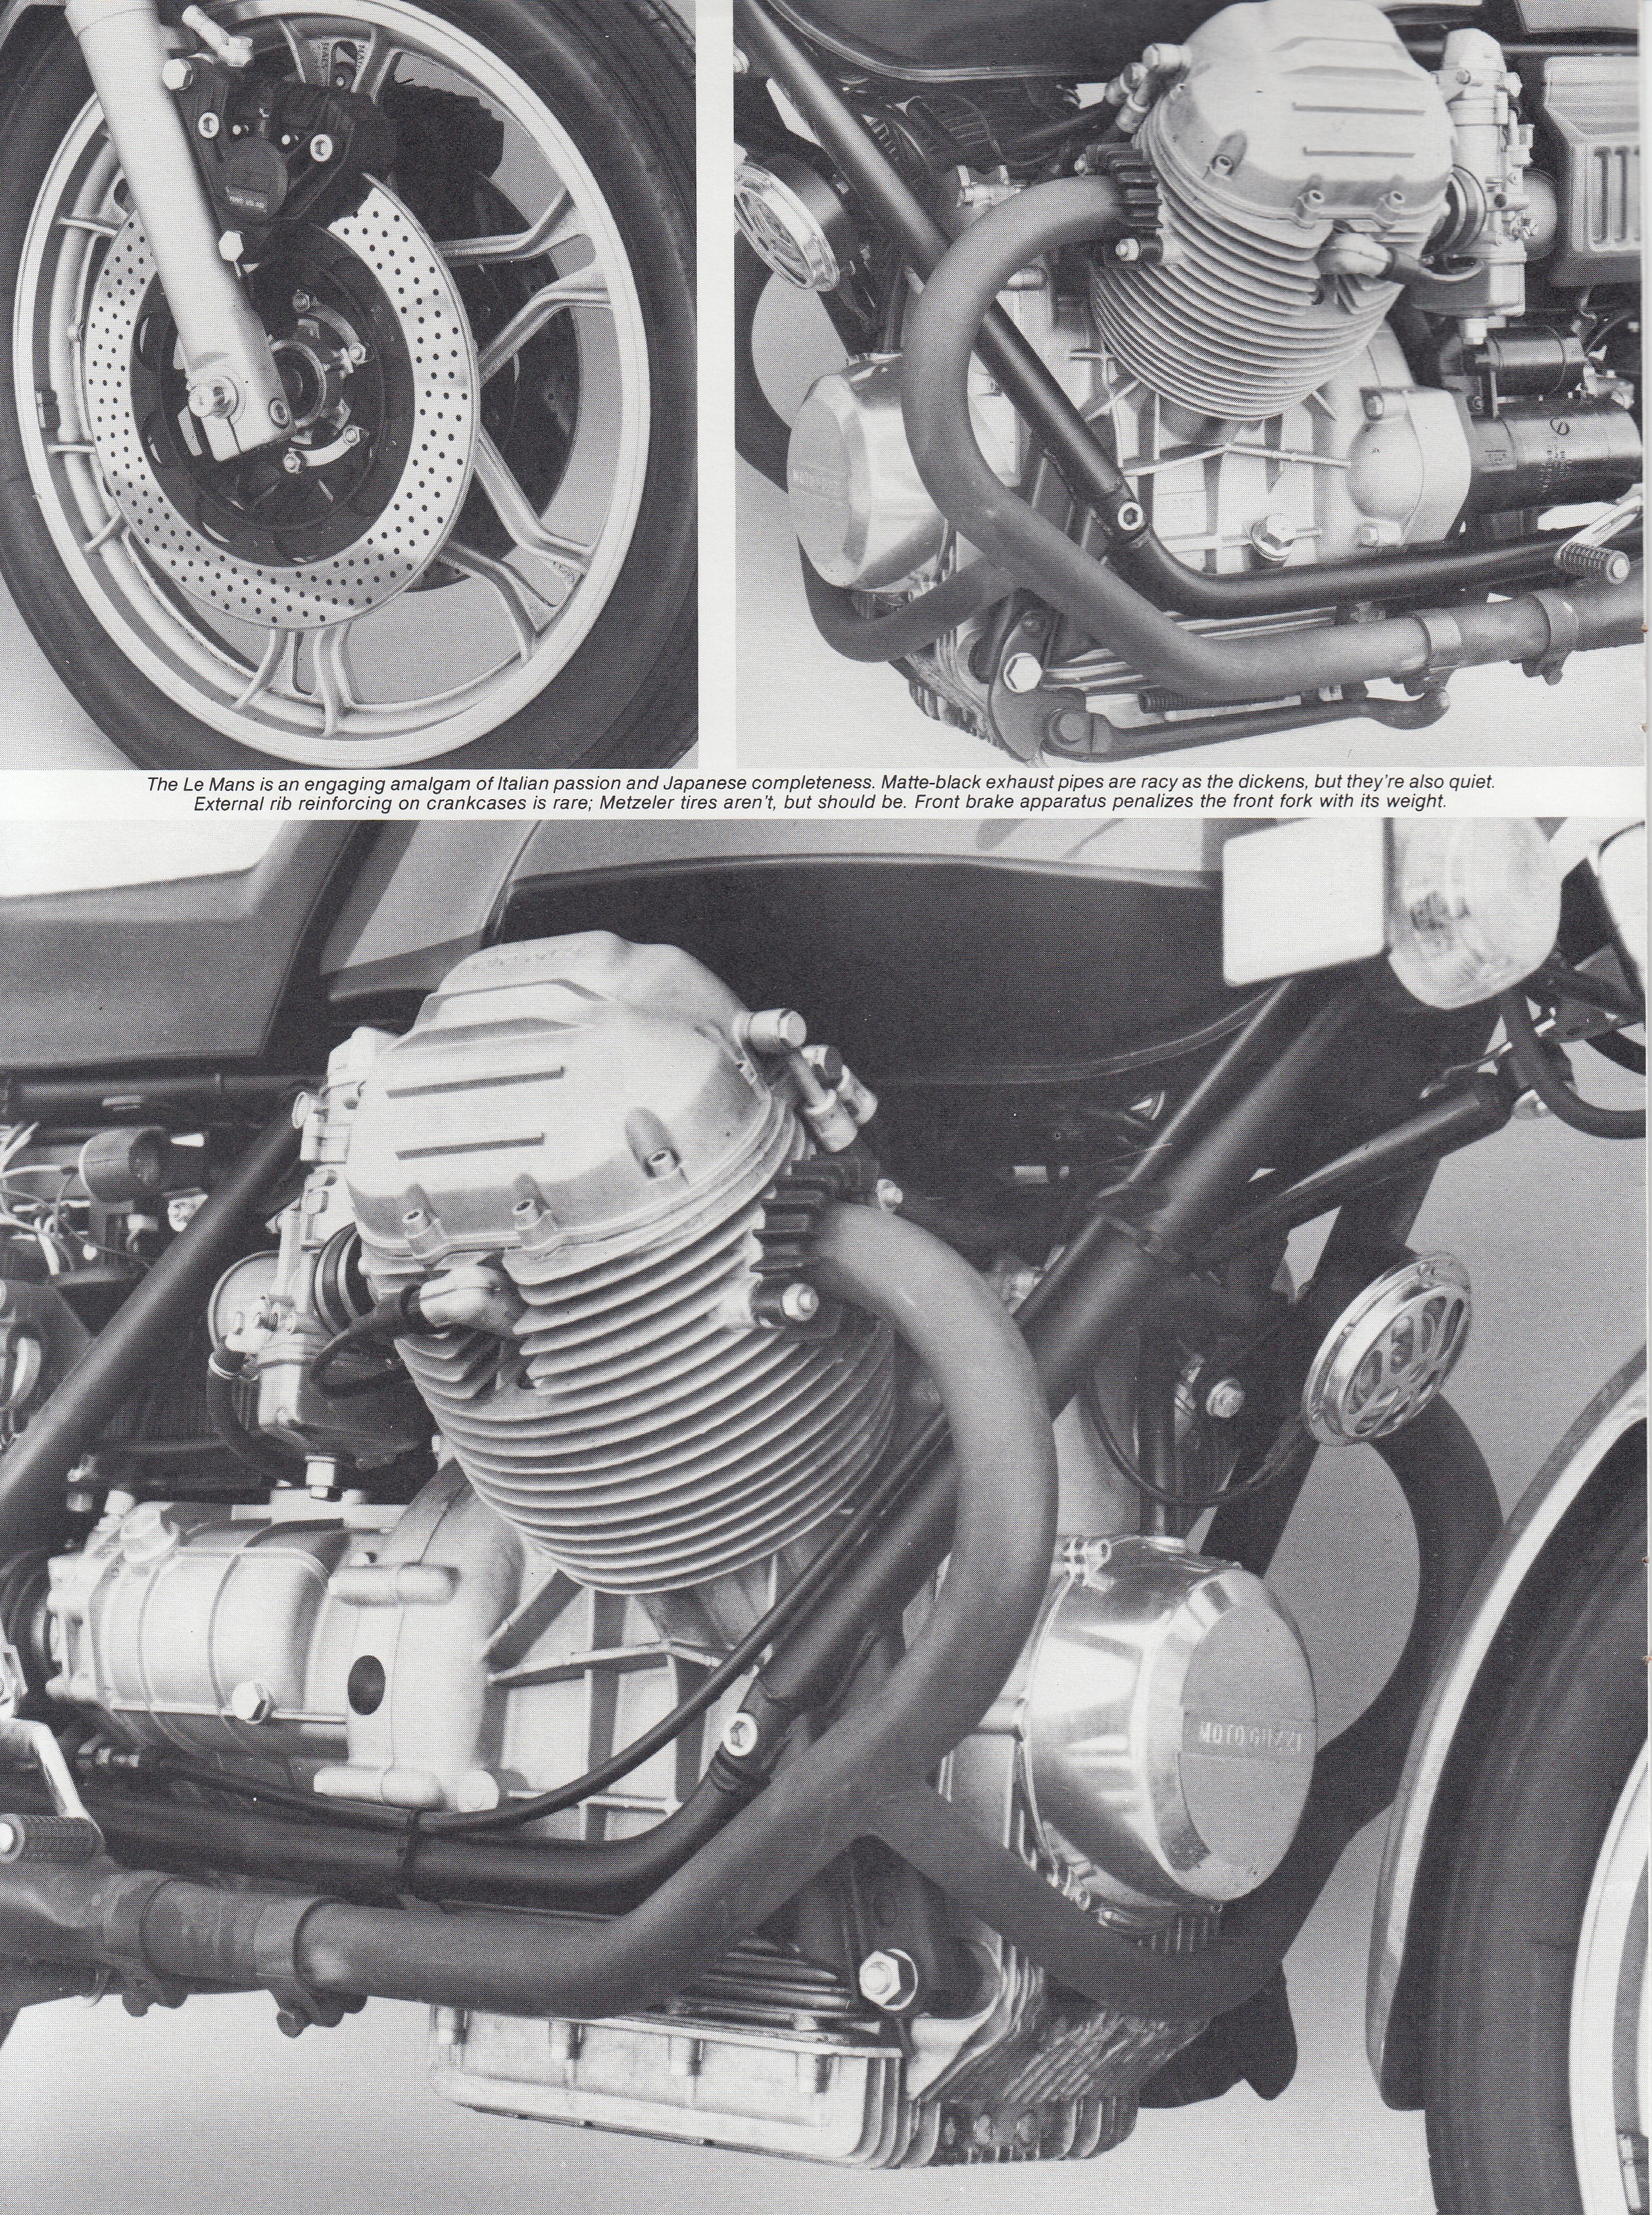 Article - Cycle (1977 August) Moto Guzzi 850 Le Mans - A flash bike for the thinking man